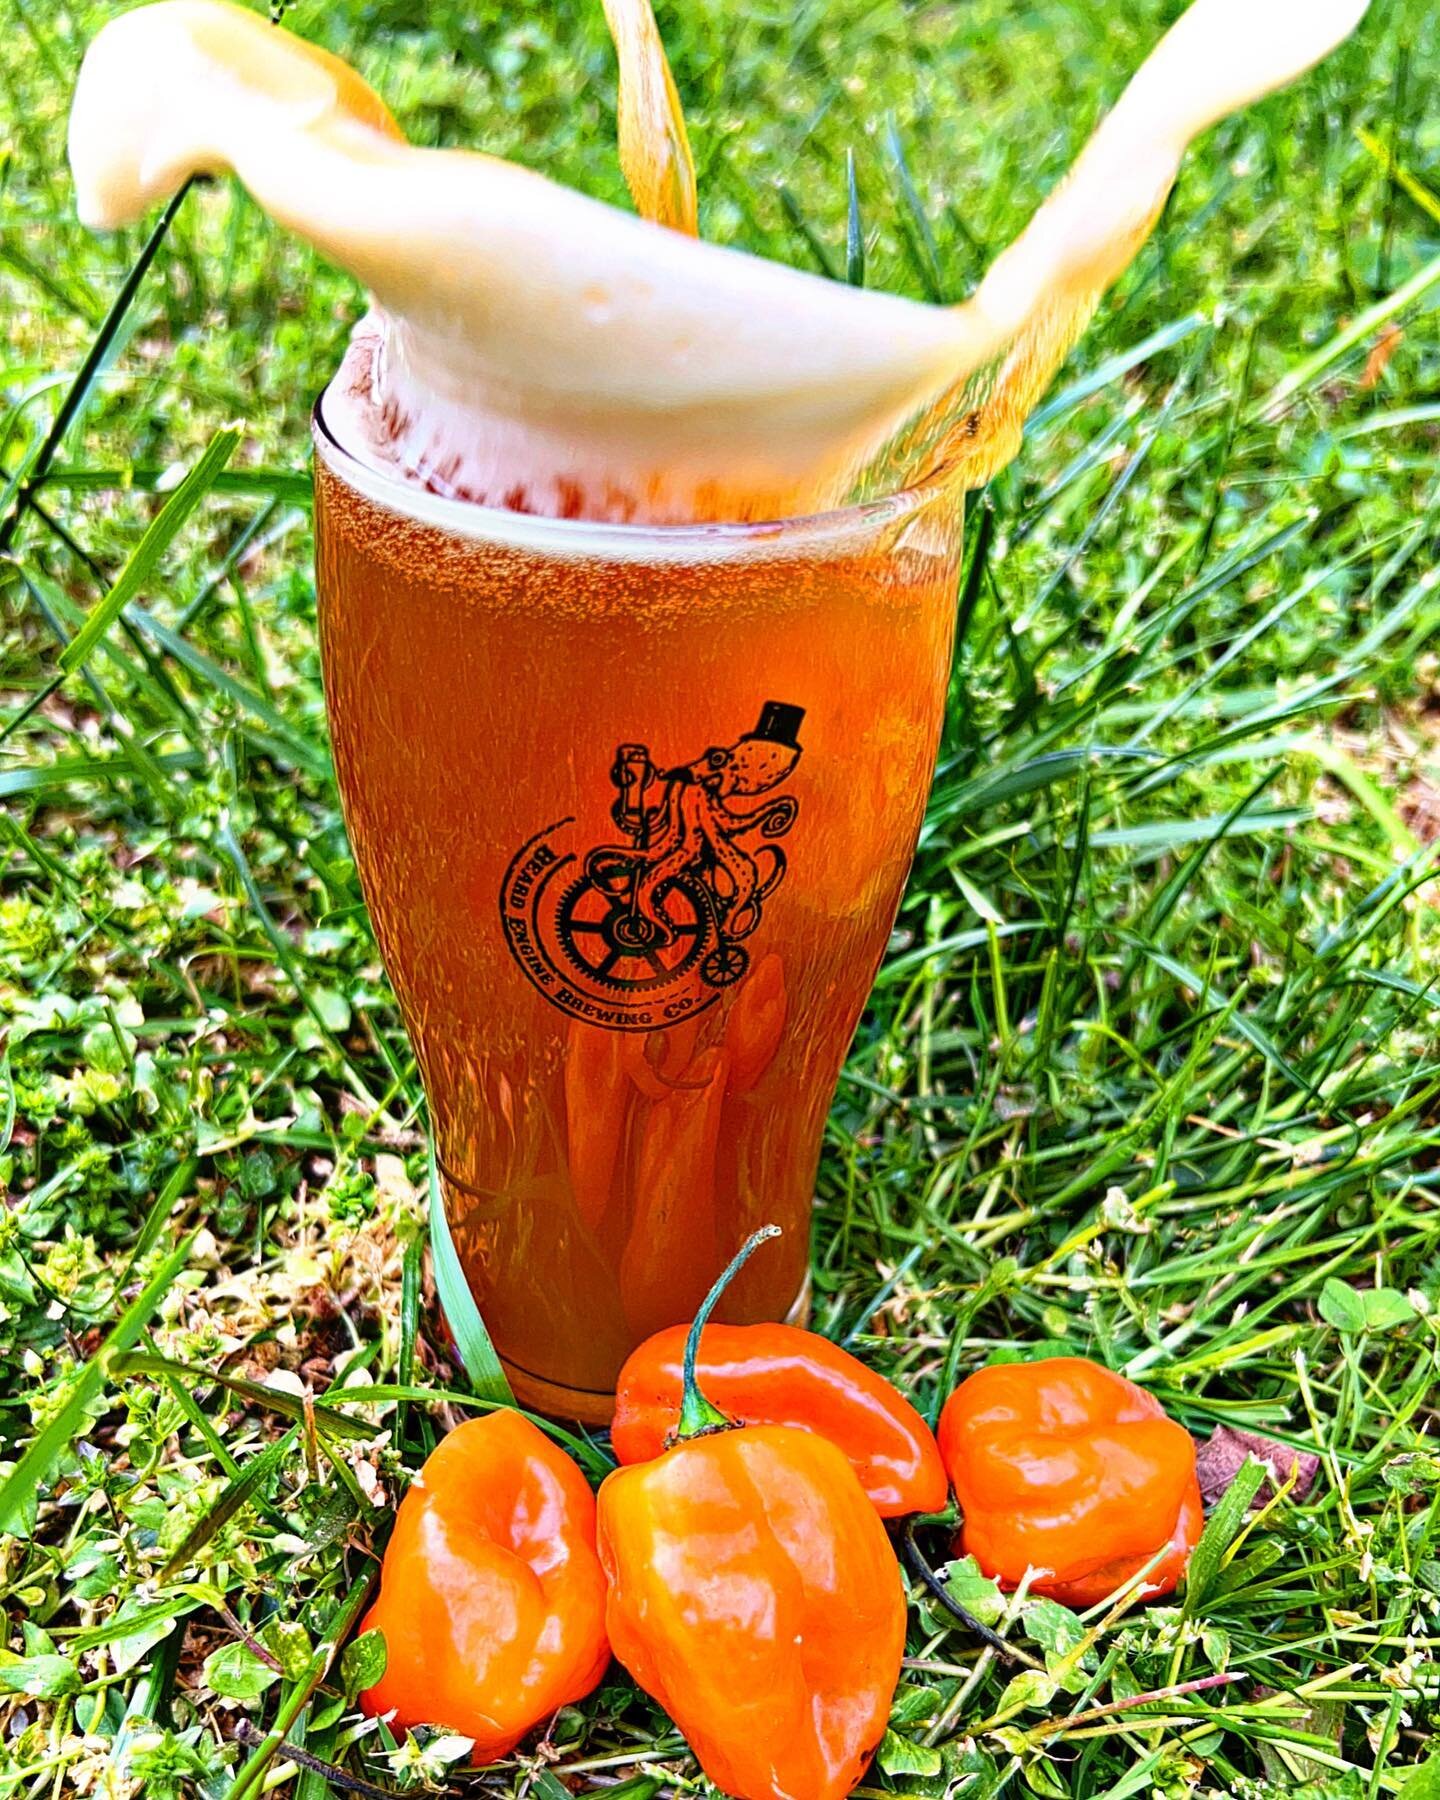 🍻🚨Tomorrow for 🇲🇽Cinco De Mayo 🇲🇽we are tapping a festive firkin🚨🍻

🍑🌶️This Apricot Habanero Amber Ale was bombarded with fresh apricots lending to a rich sweetness and finishes with a bold spice and bright flavour of habaneros and juicy ap